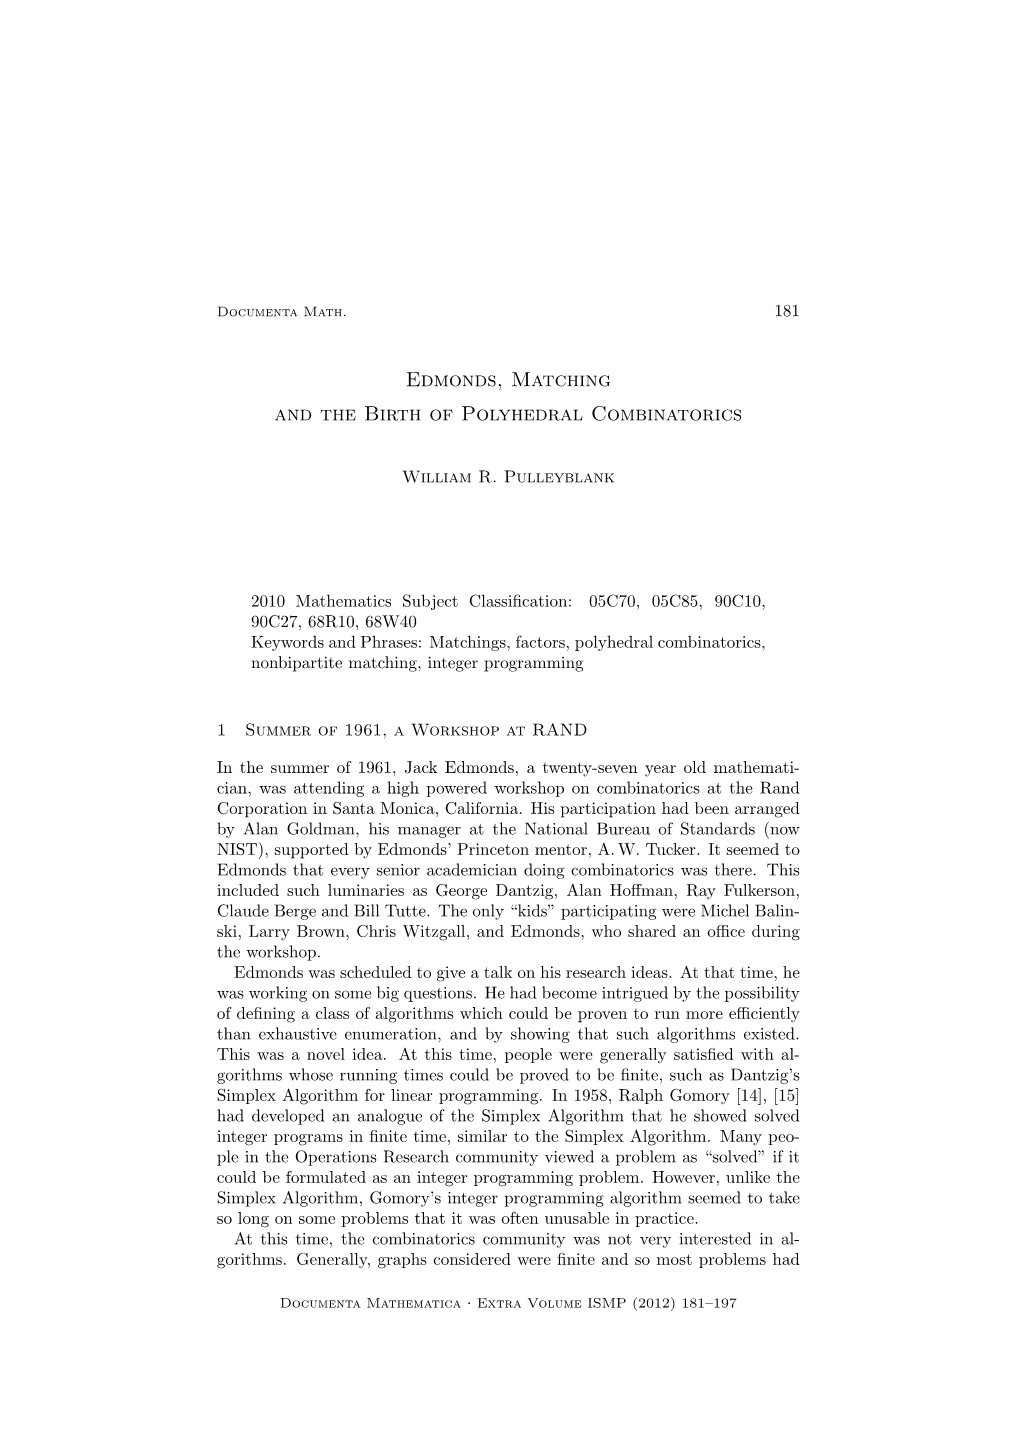 Edmonds, Matching and the Birth of Polyhedral Combinatorics